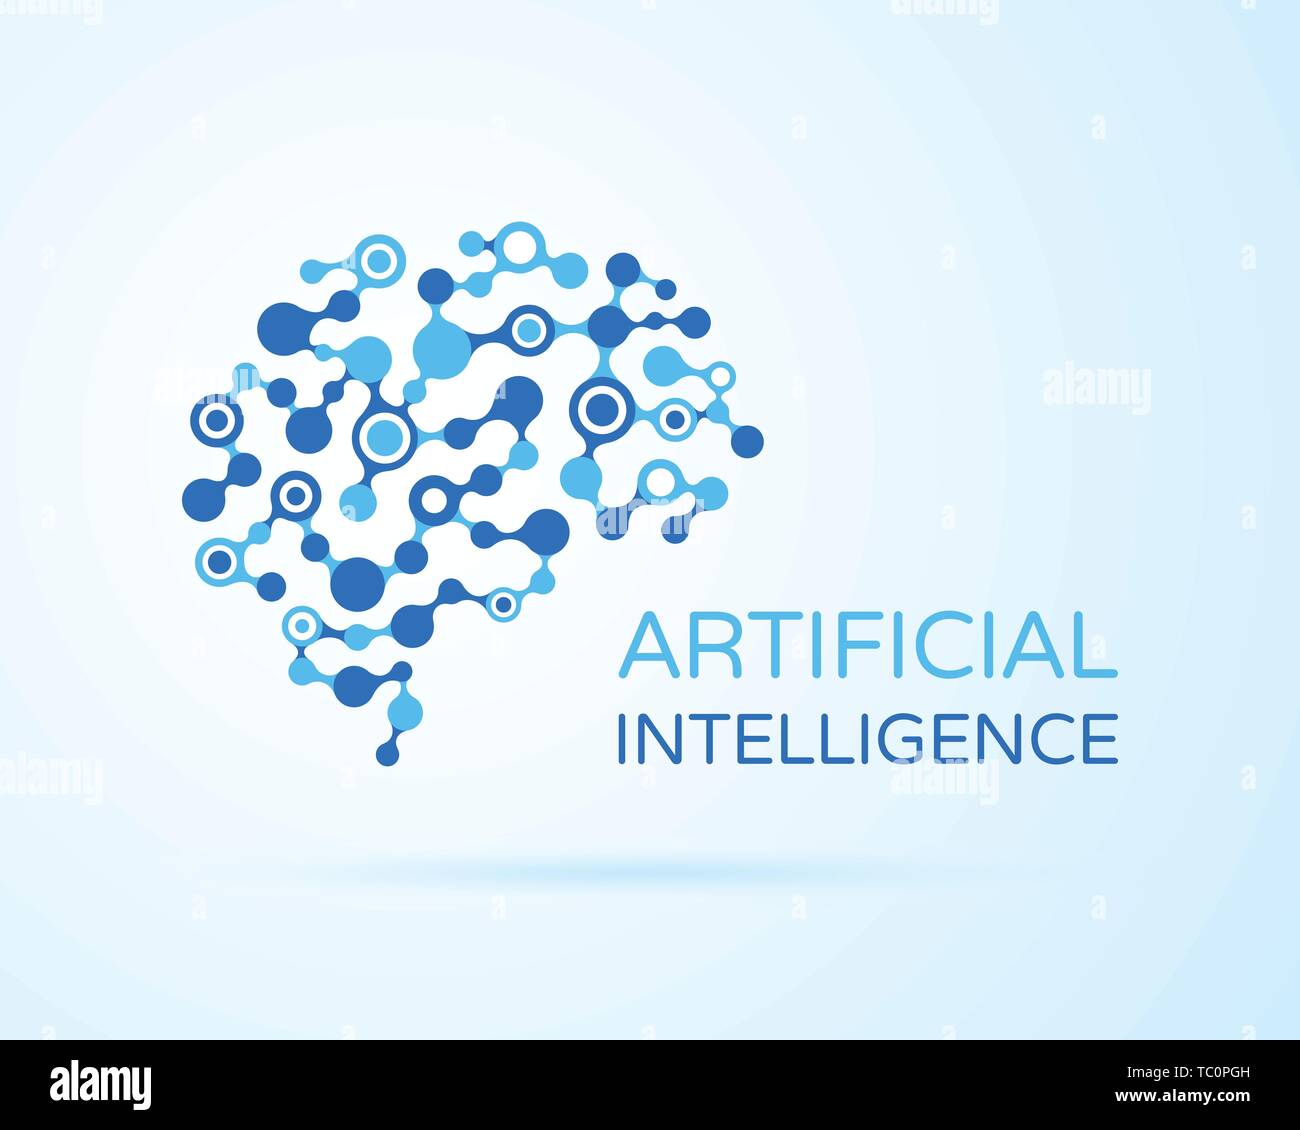 Artificial Intelligence (AI) vector logo. Artificial intelligence (AI), machine deep learning, data mining and another modern computer technologies co Stock Vector